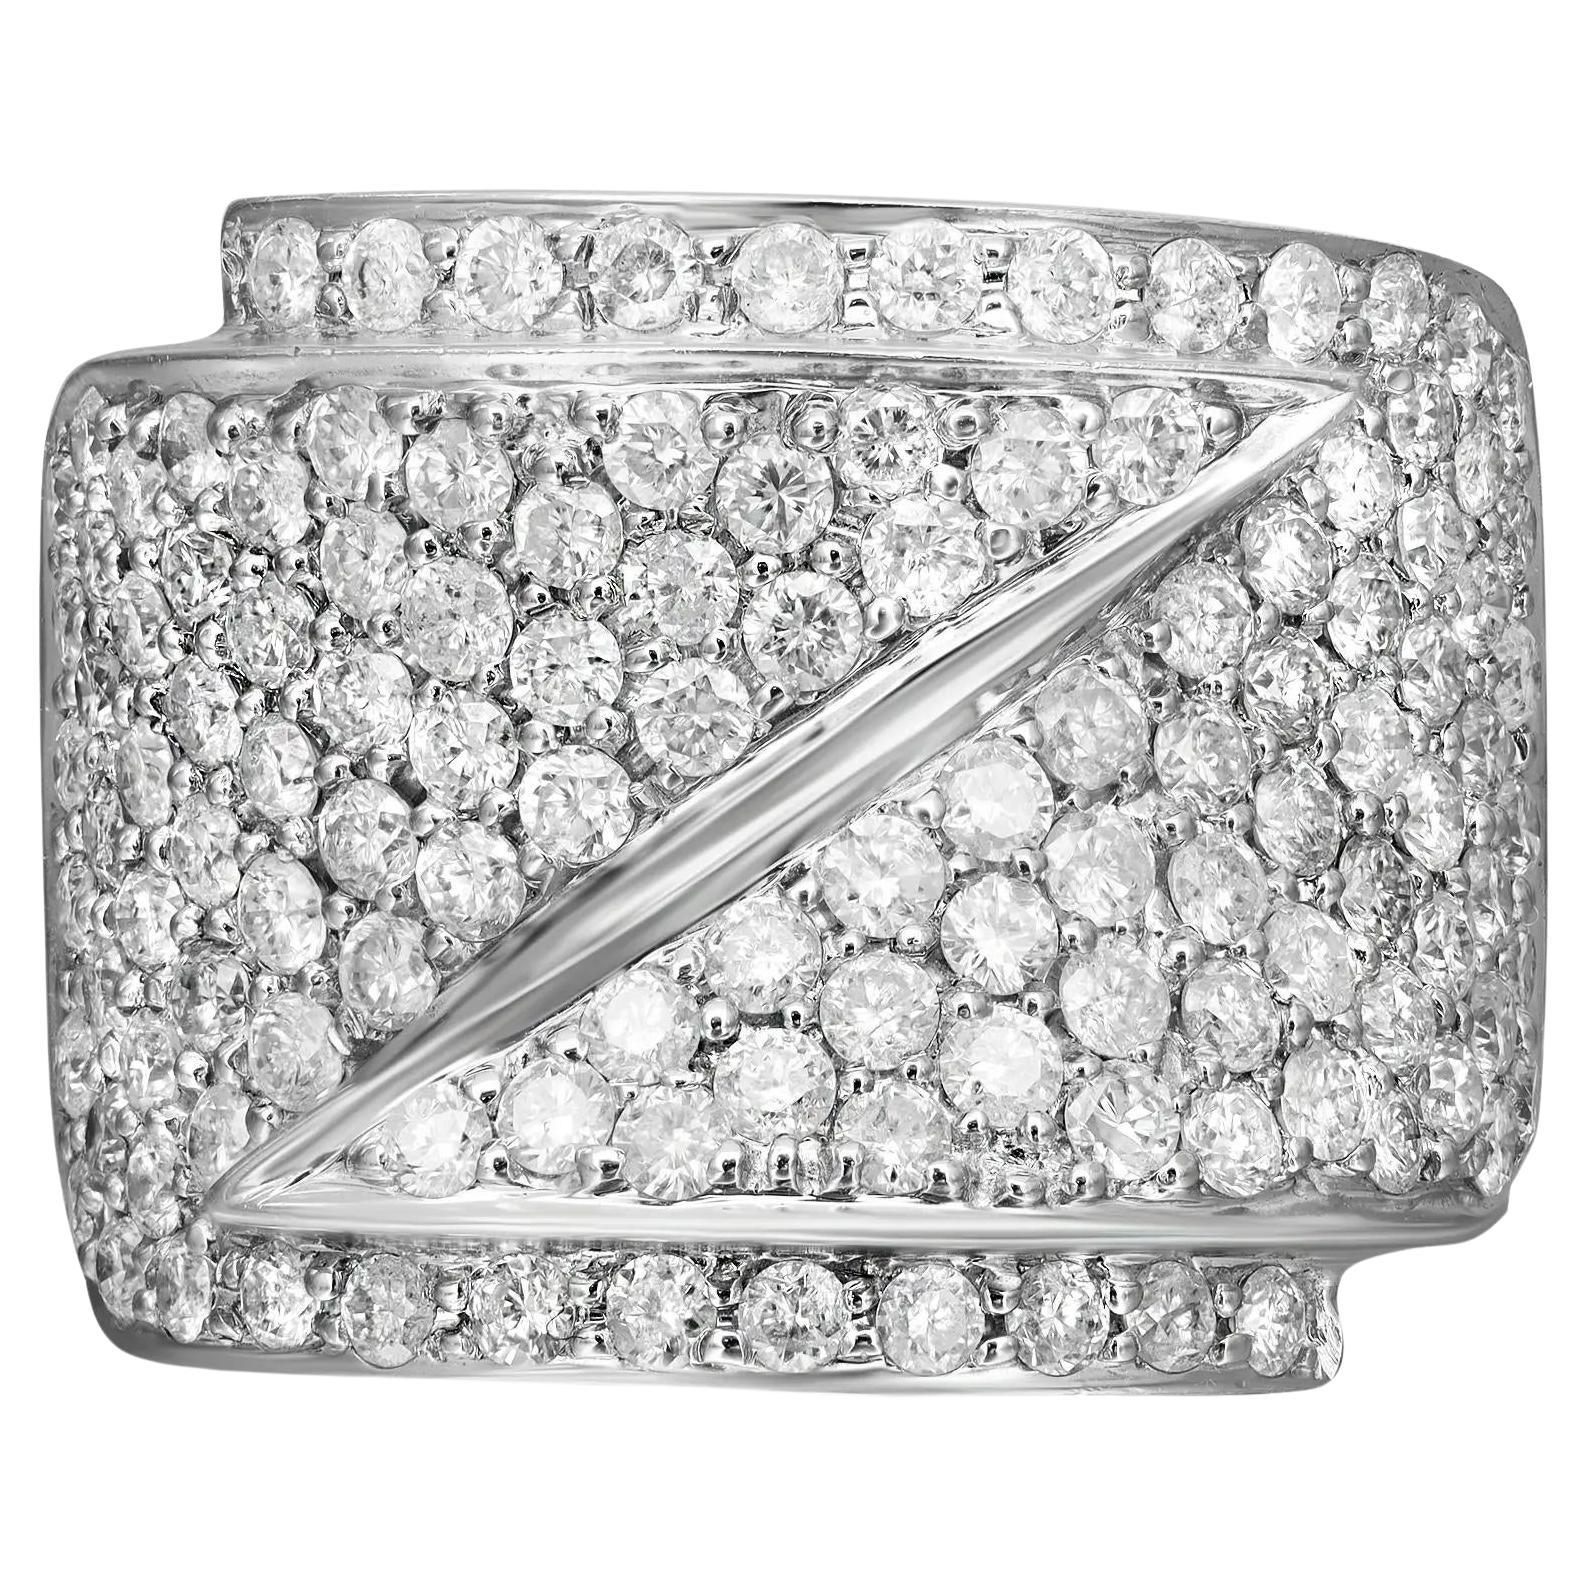 2.39Cttw Pave Set Round Cut Diamond Wide Band Ring 14K White Gold Size 7.75 For Sale